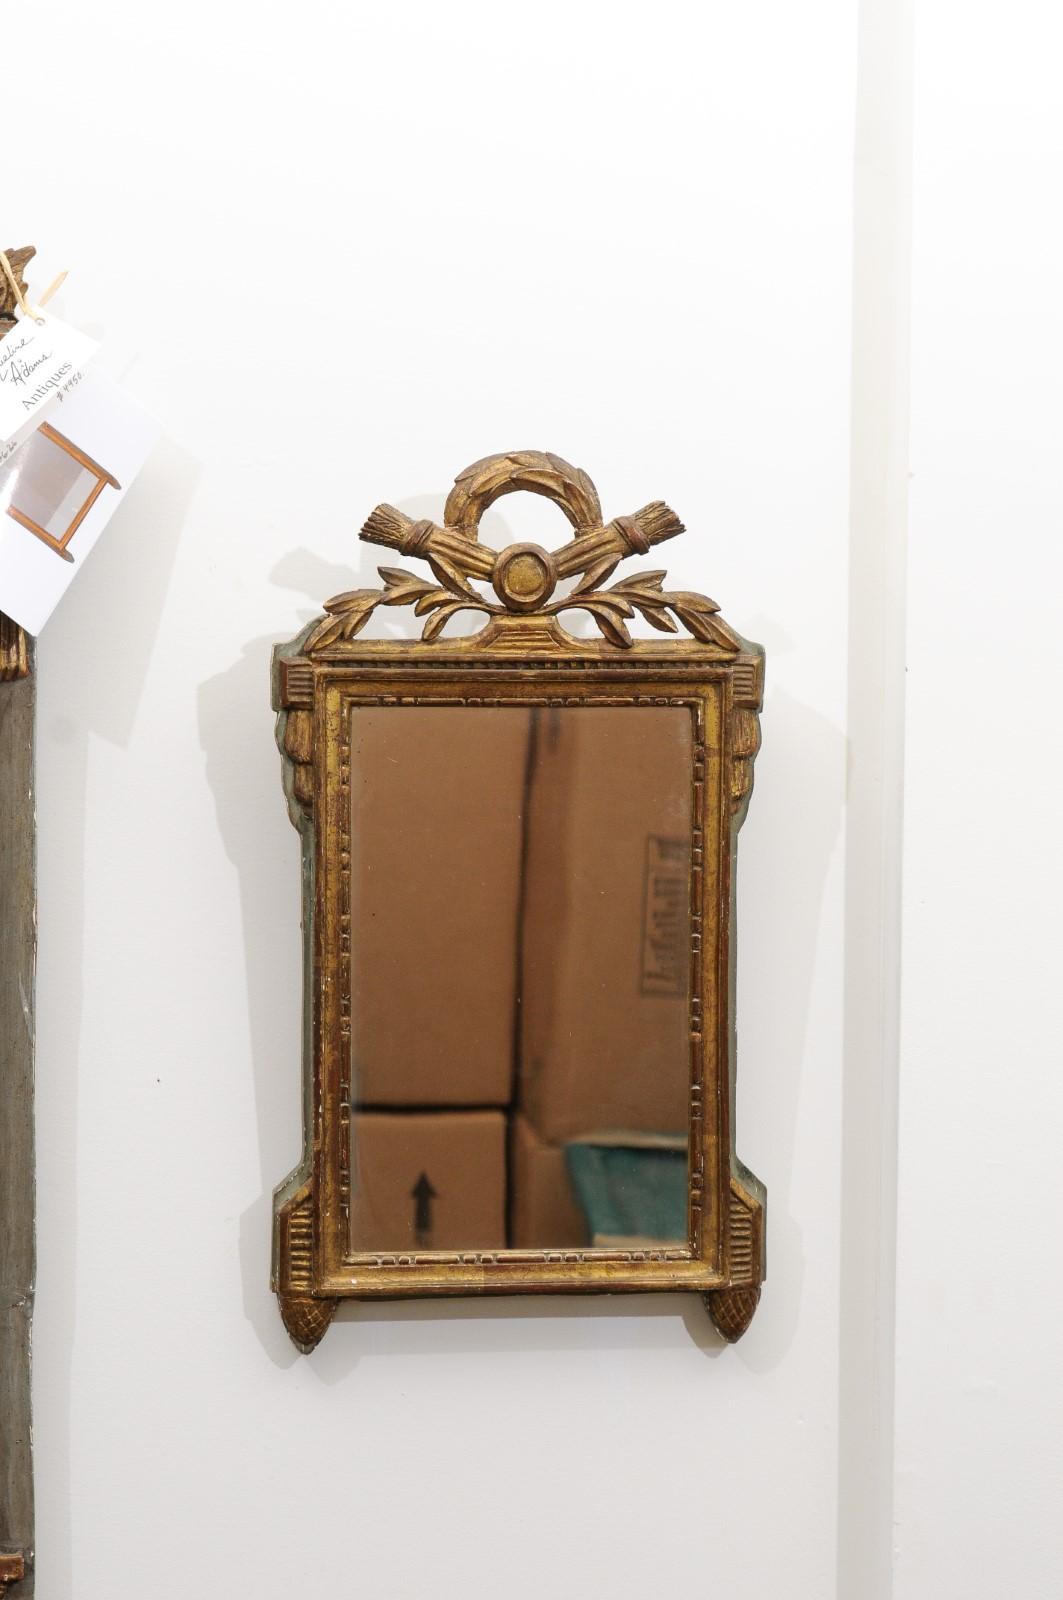 A French Louis XVI period gilt and painted mirror from the late 18th century, with carved crest. Created in France during the last decade of the 18th century, this gilt mirror attracts our attention with its crest carved with quivers and arrows